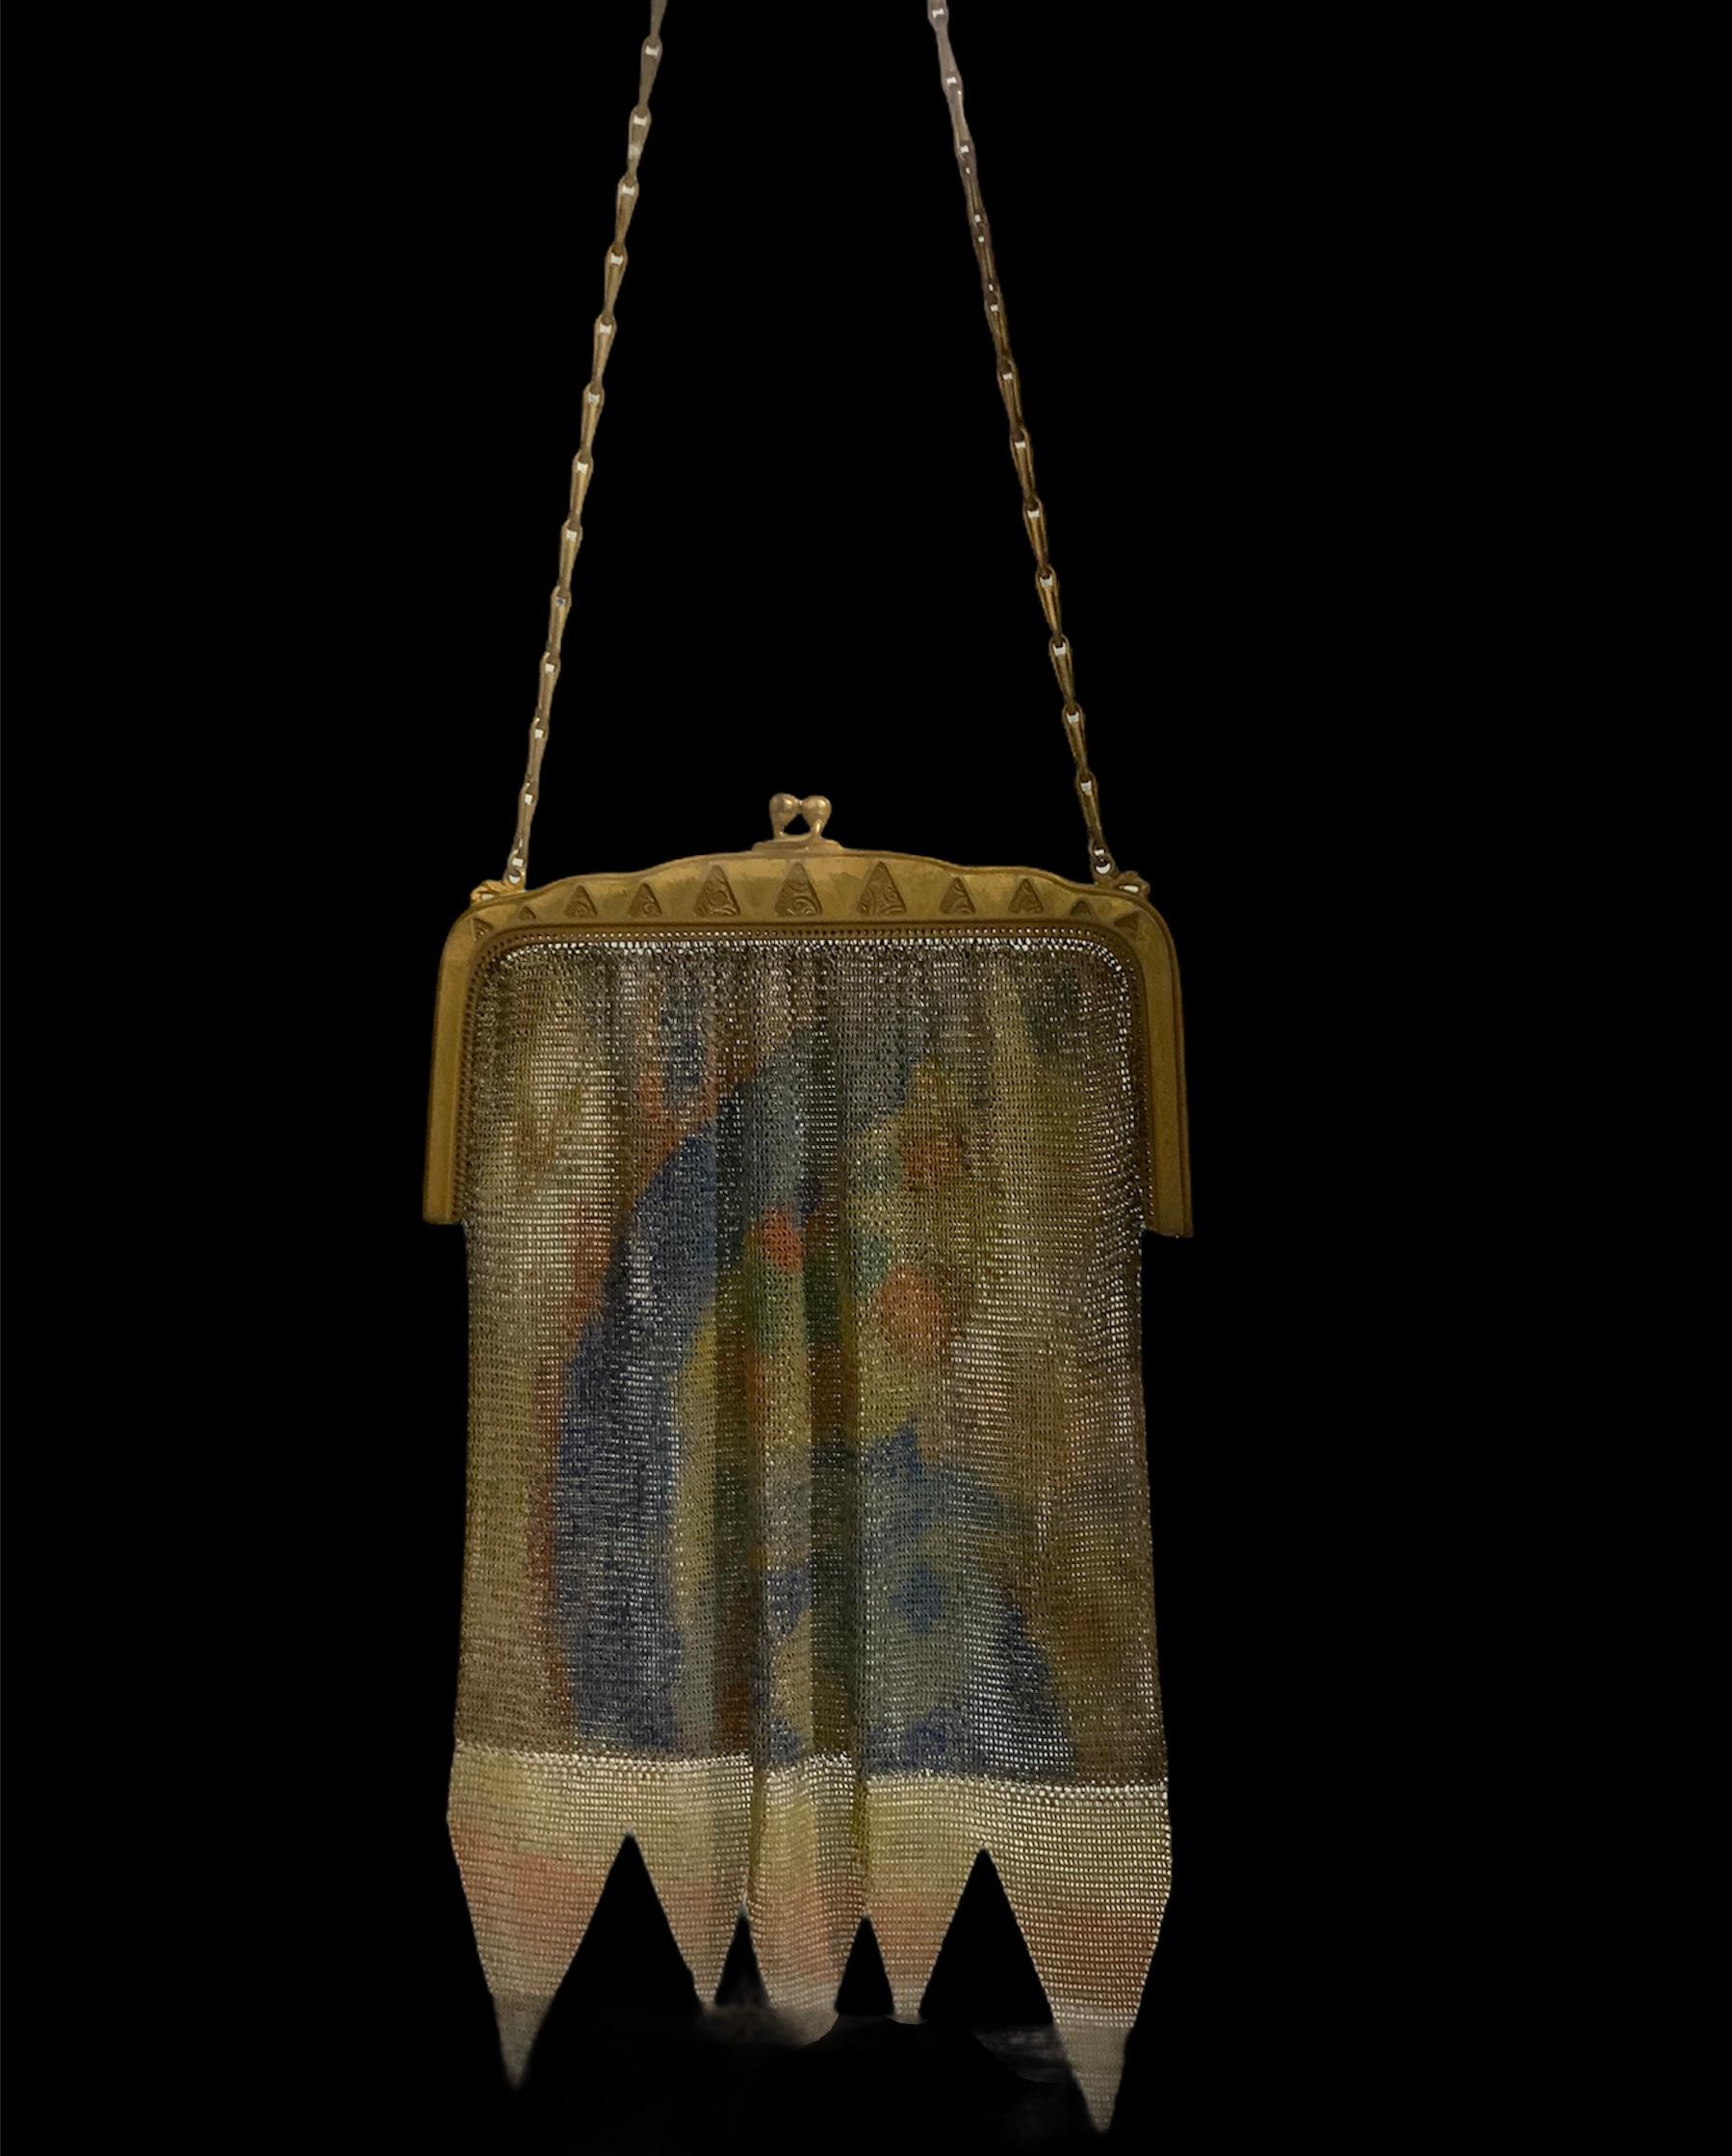 This is an Art Deco Whiting & Davis Dresden mesh evening purse. It is enamel hand painted with royal blue, yellow, orange and green colors featuring an “impressionist“ pattern. It ends with five arrows shaped fringe at the bottom. It has a gold tone